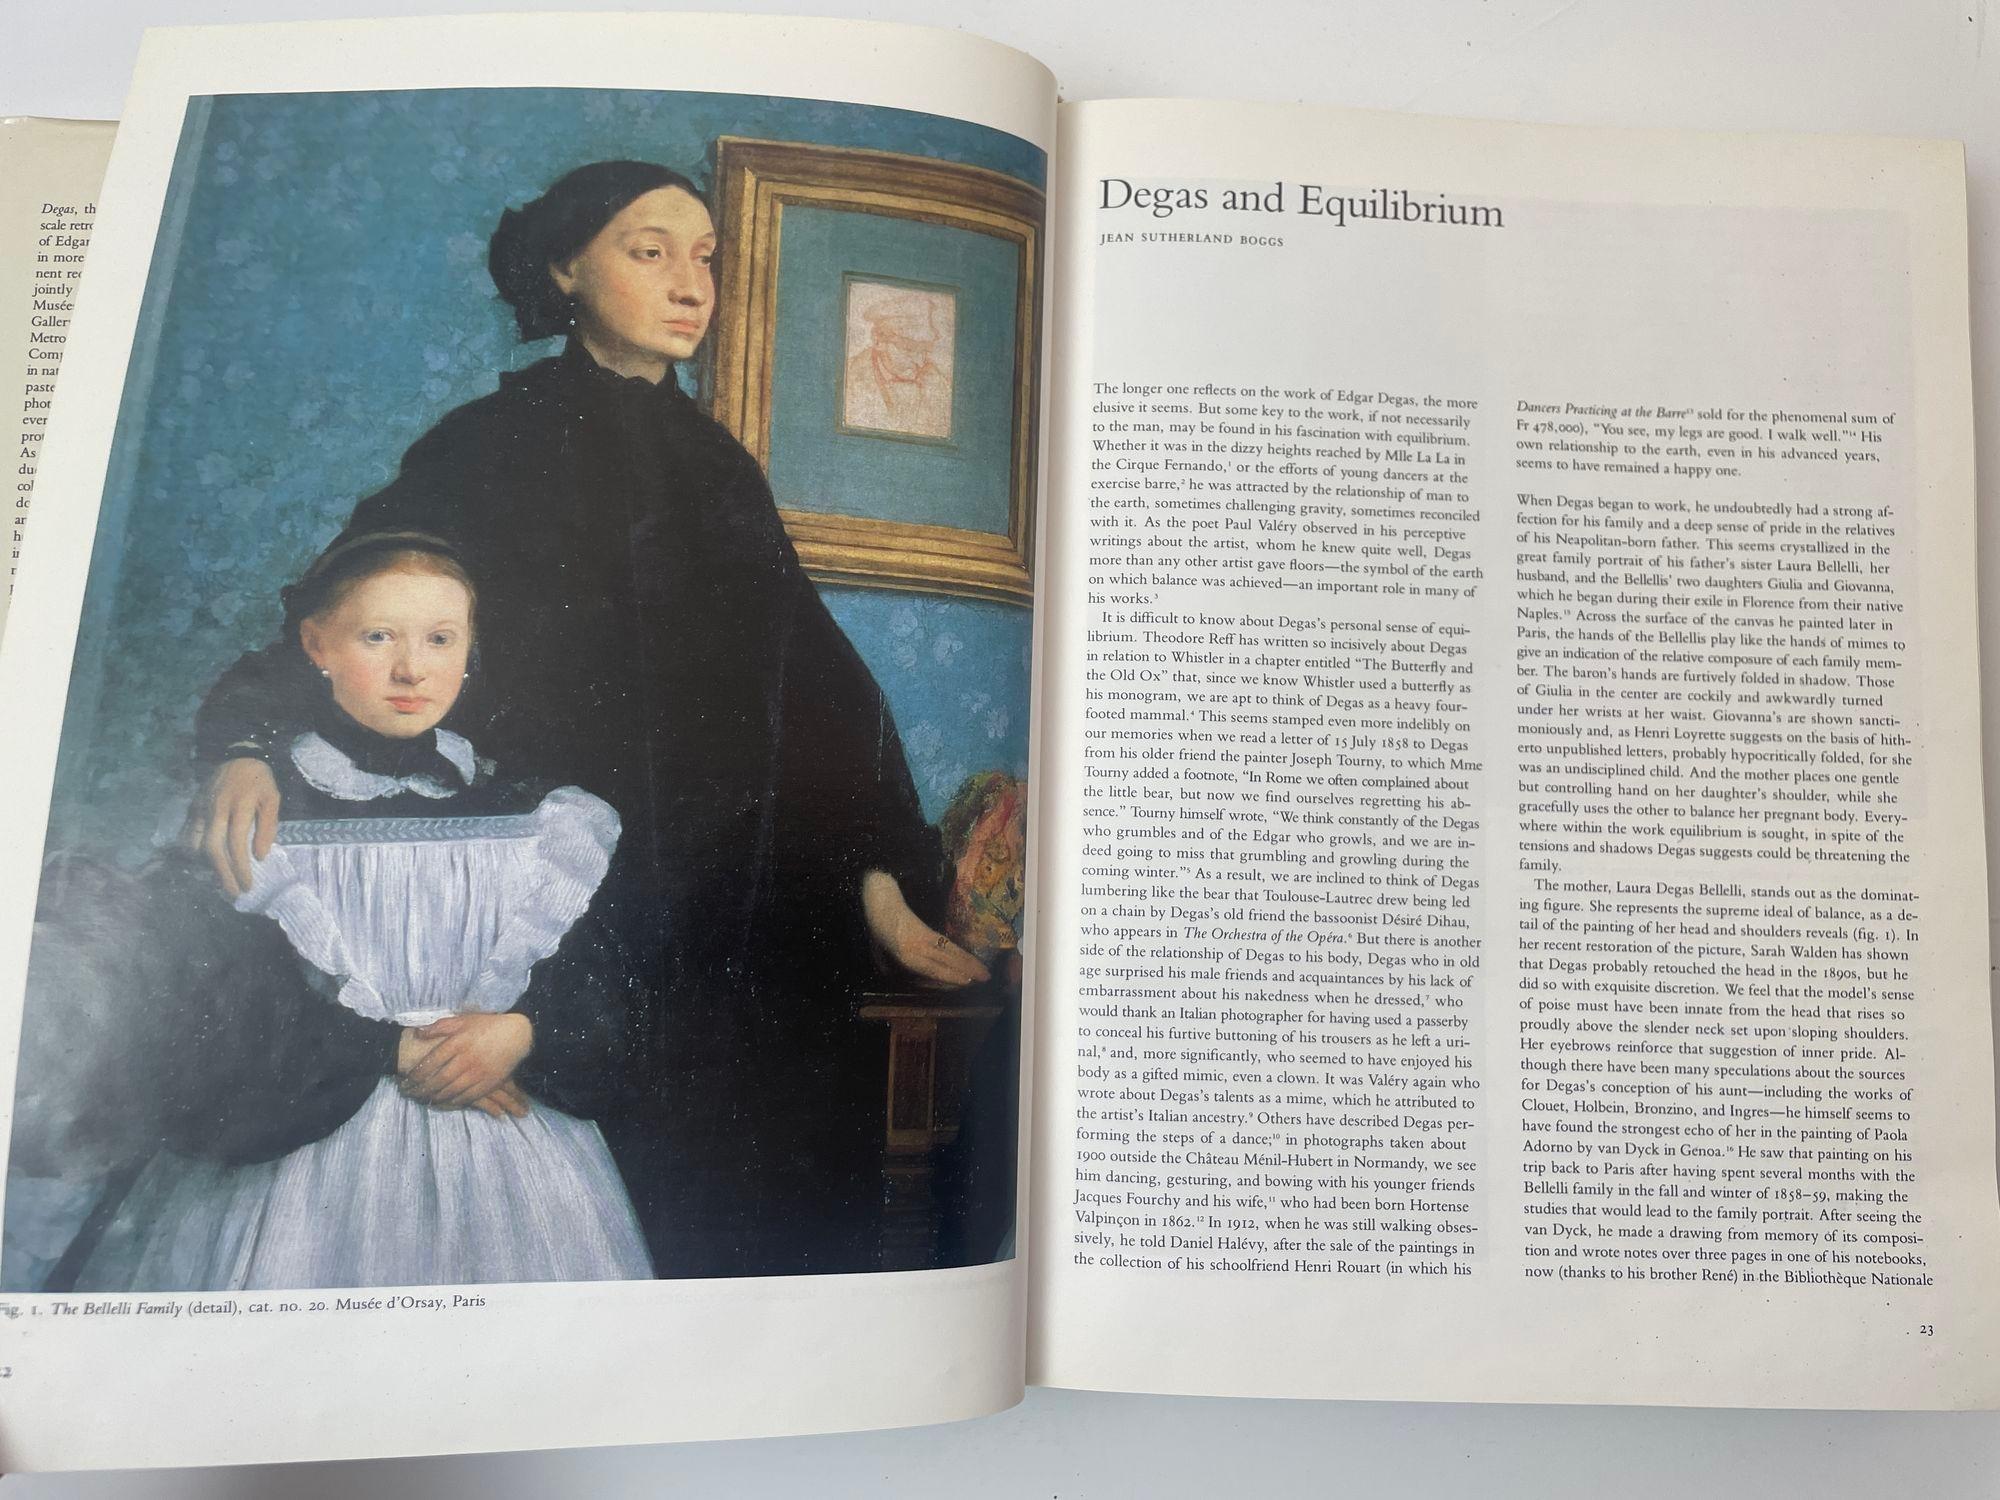 20th Century Degas by Jean Sutherland Boggs Hardcover Book Met Museum of Art 1st Ed. 1988 For Sale